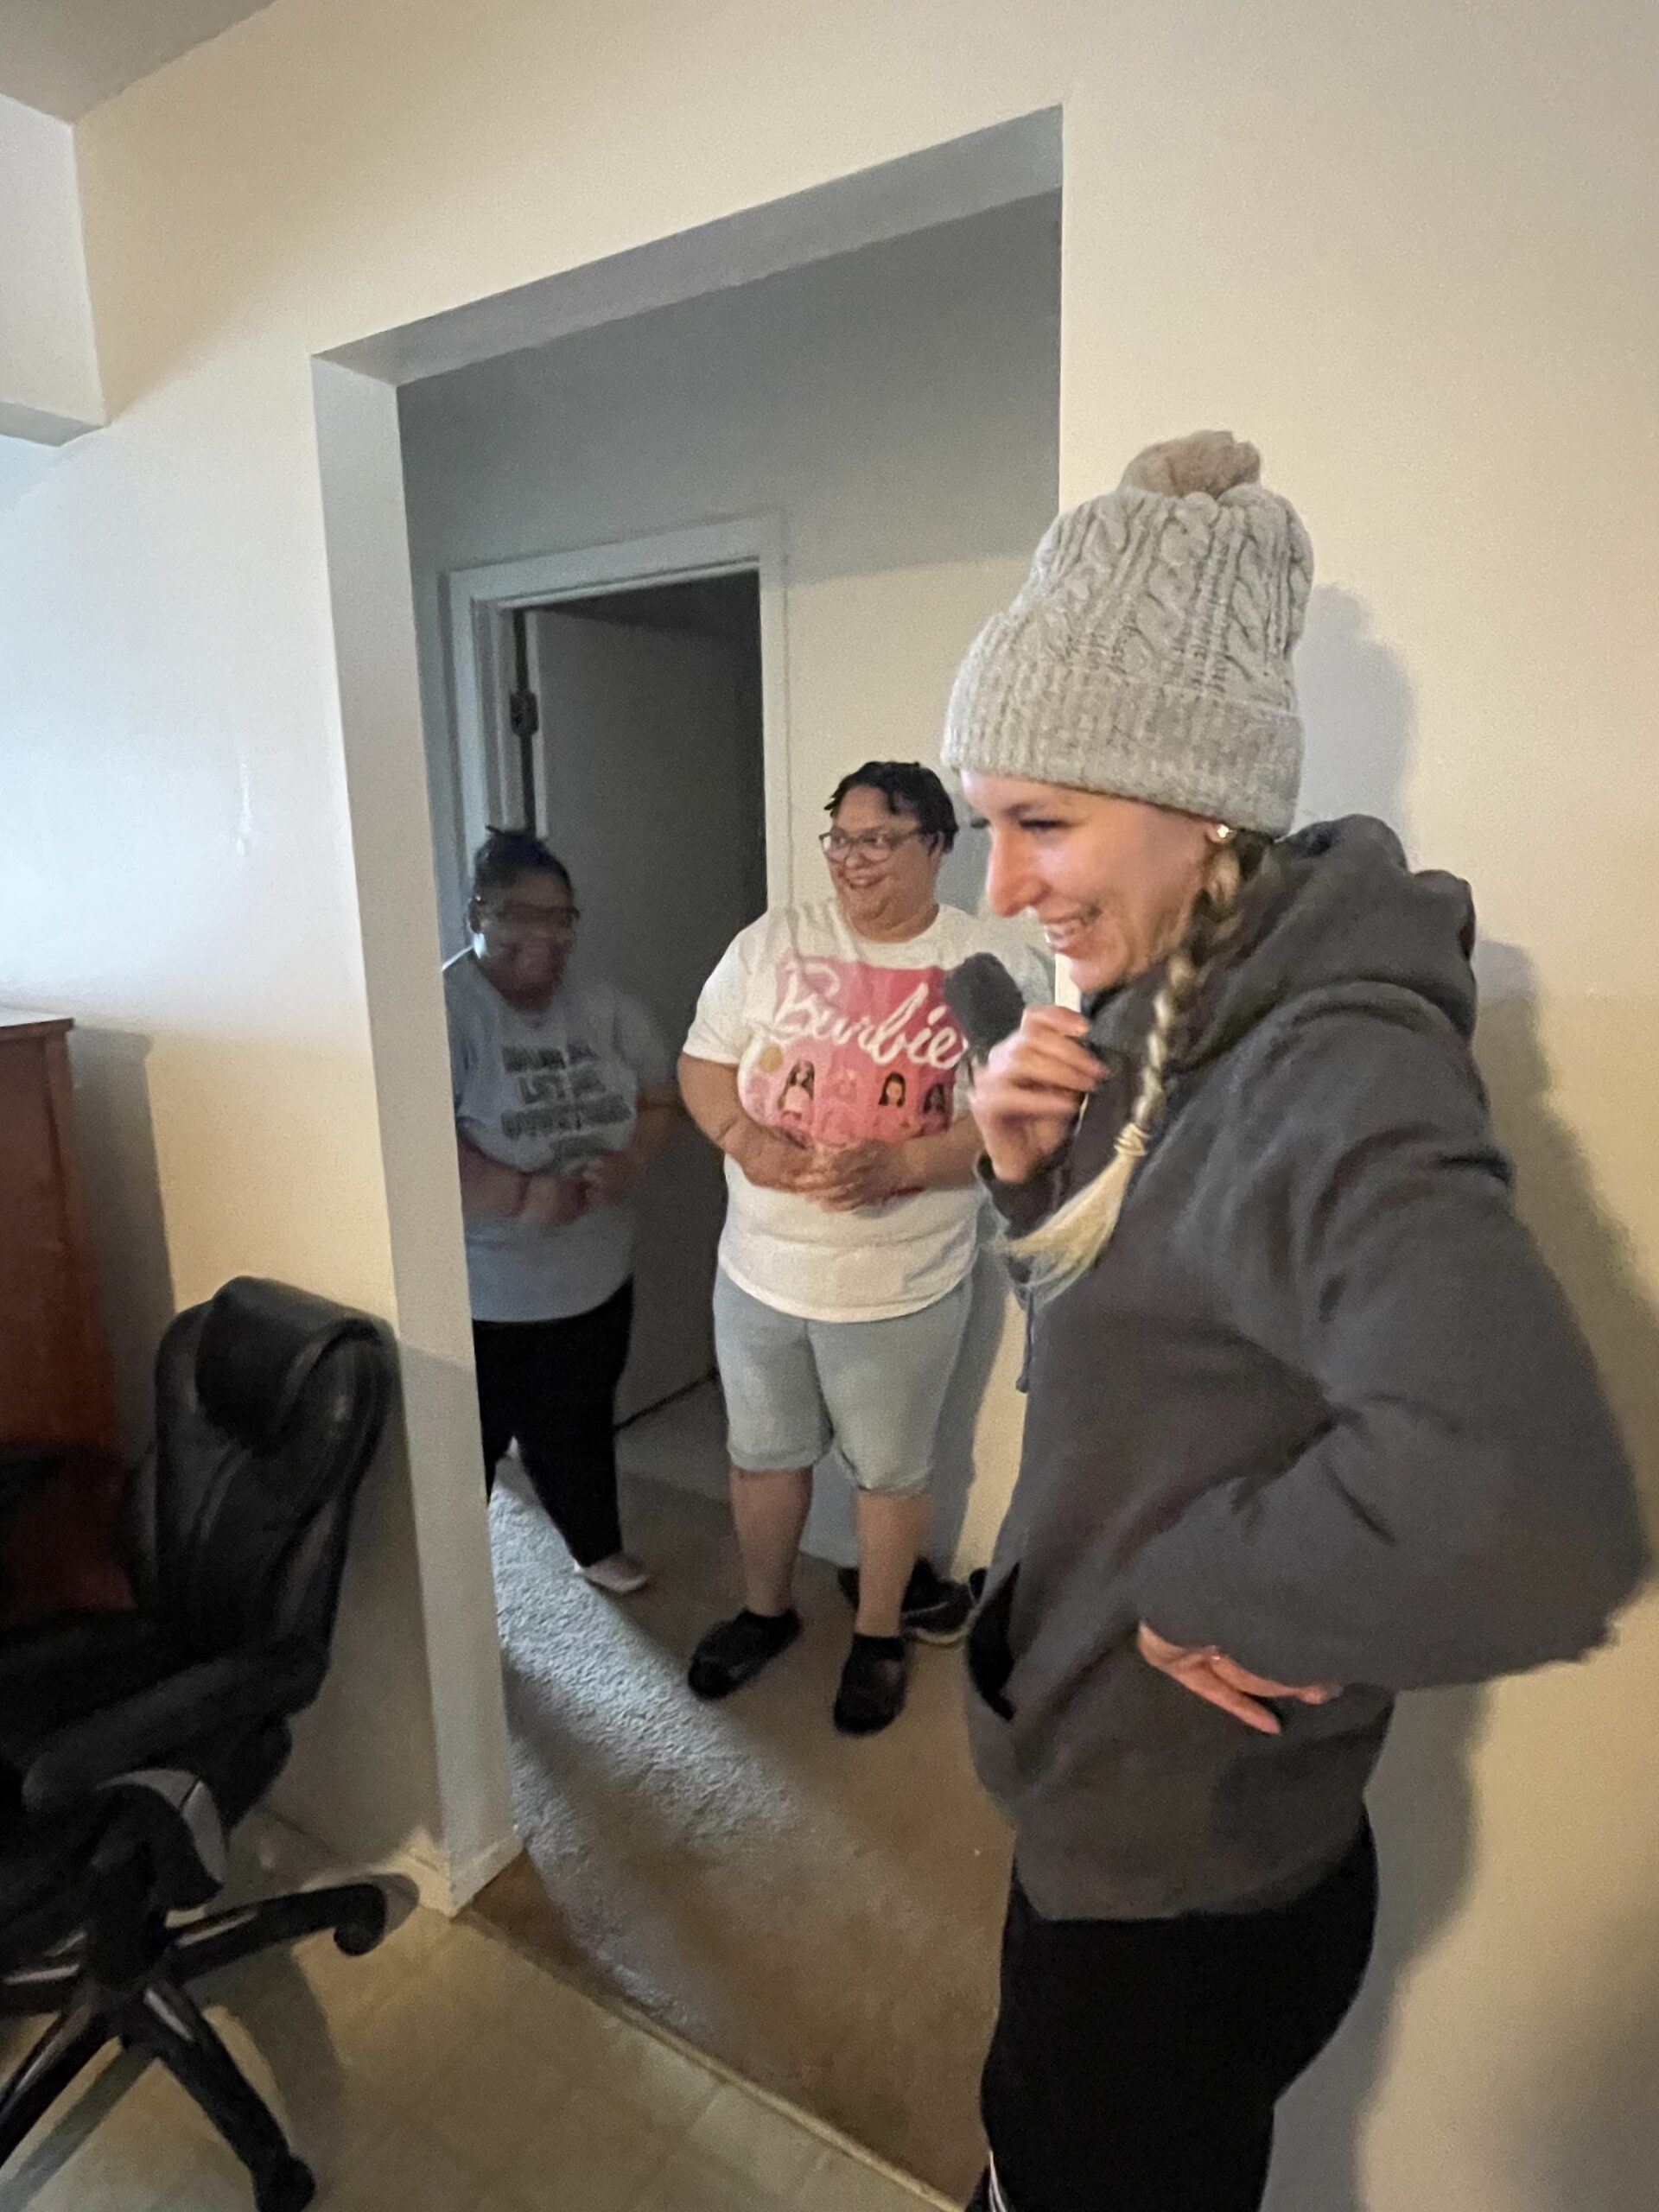 Sisters Jyeisha and Jessica Edwards walk out of a bedroom to see their apartment is fully furnished, thanks to work by nonprofit Felicia’s Donation Closet. (Gaby Vinick/WPR)